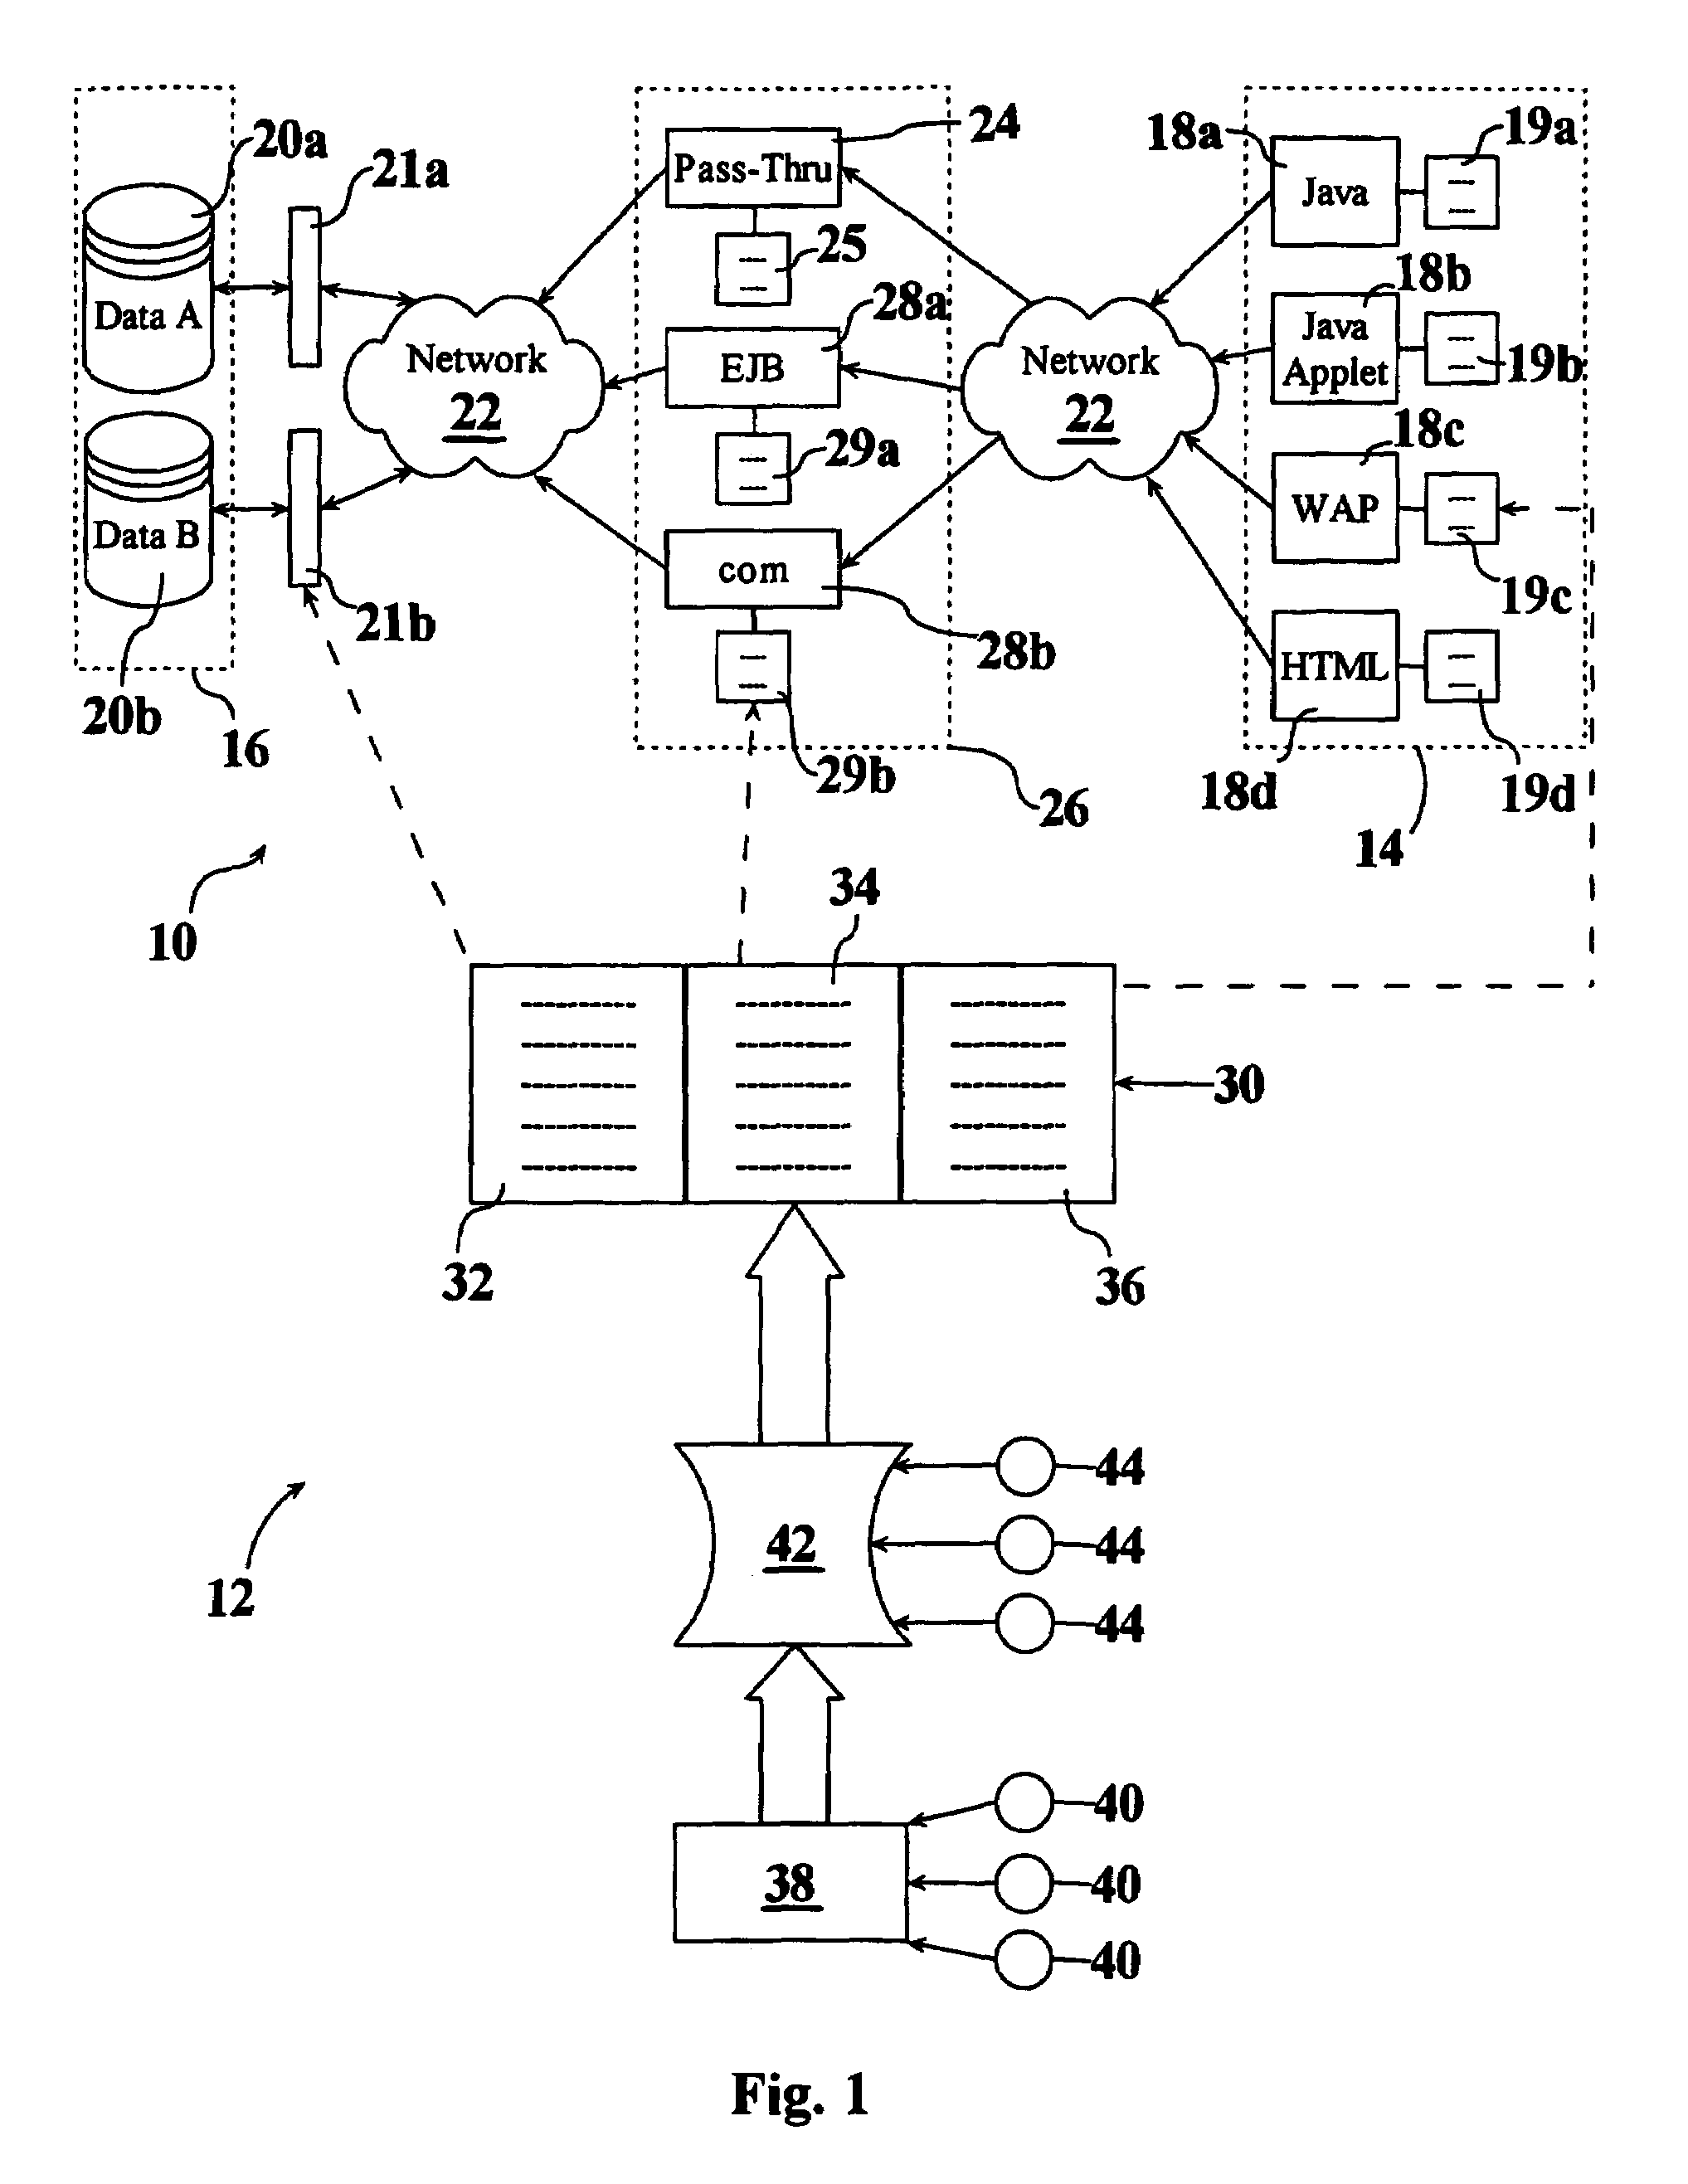 System and method for multiple level architecture by use of abstract application notation